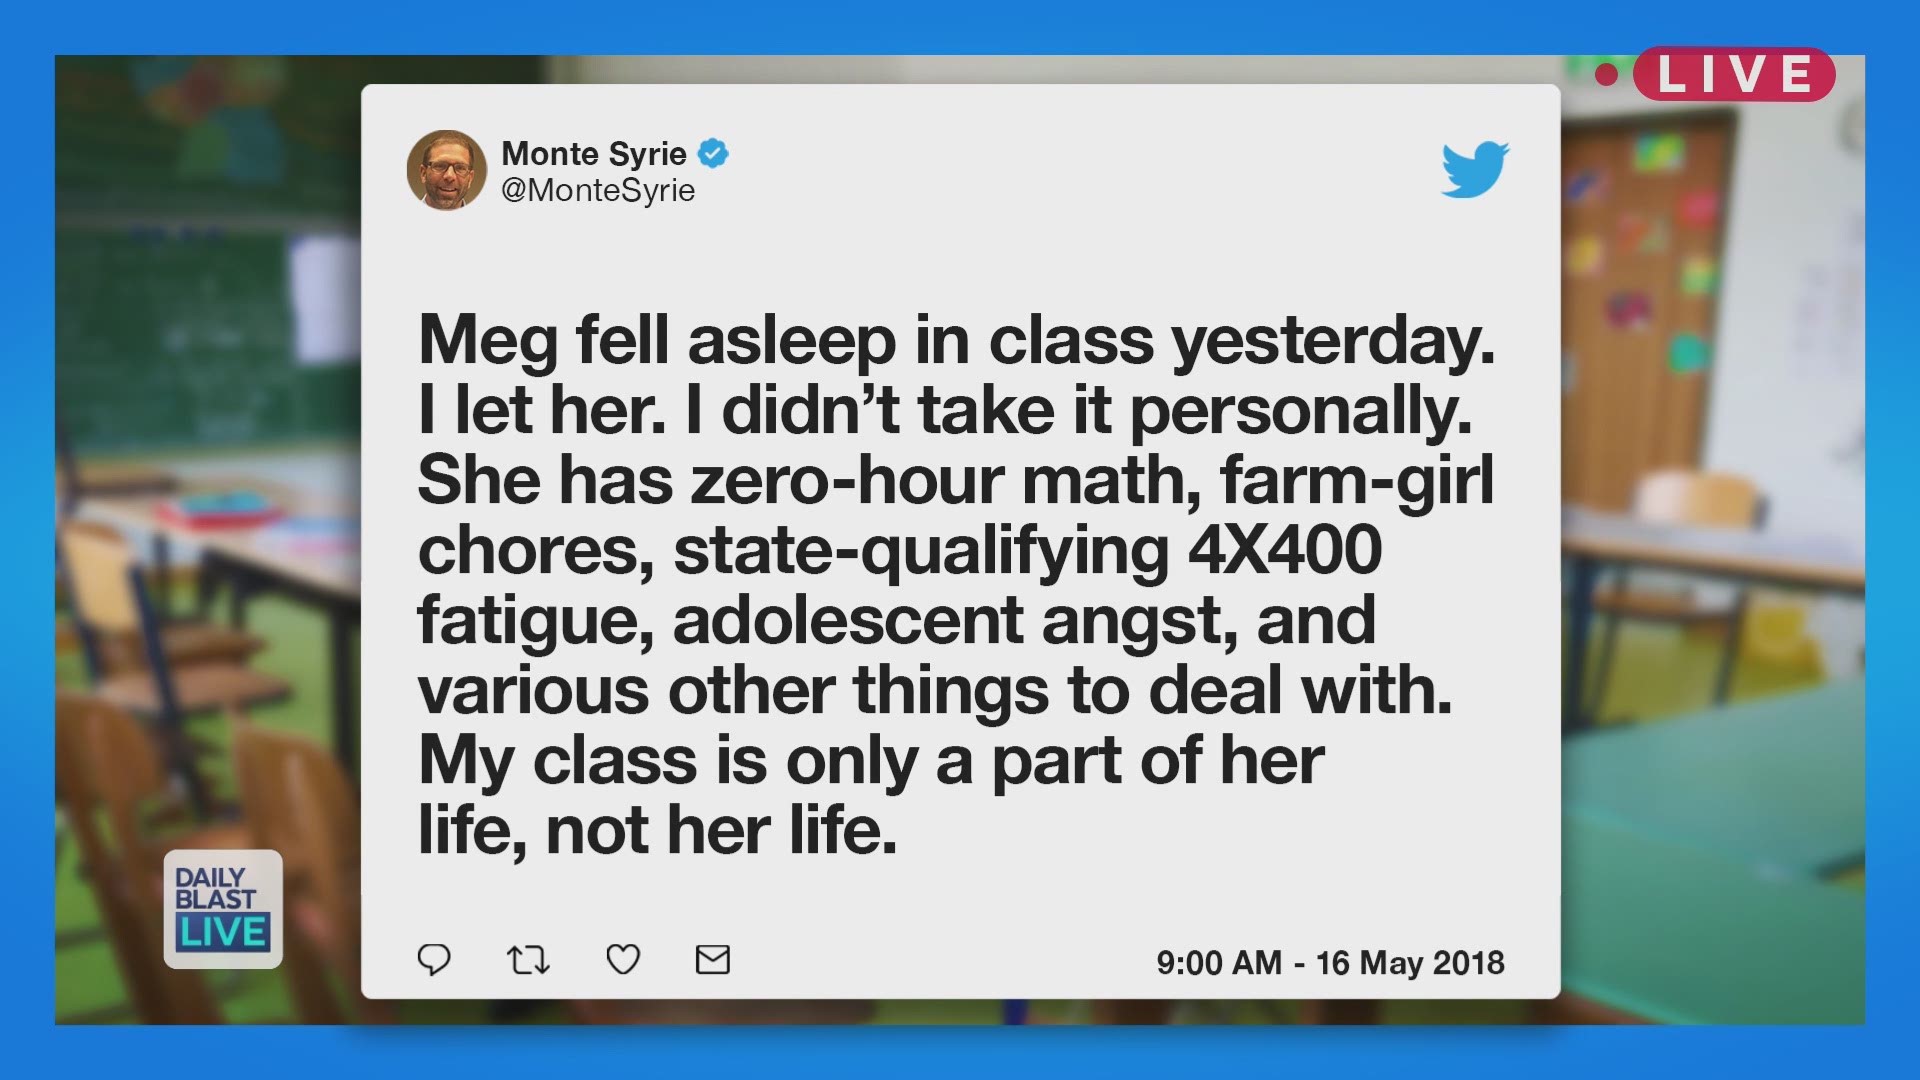 Ever take a snooze during class? Well a high school teacher in Spokane, Washington gave a wake-up call no one expected. Monte Syrie, a long-time English Teacher, took to Twitter to write about his choice letting an exhausted student sleep in his class. Sy